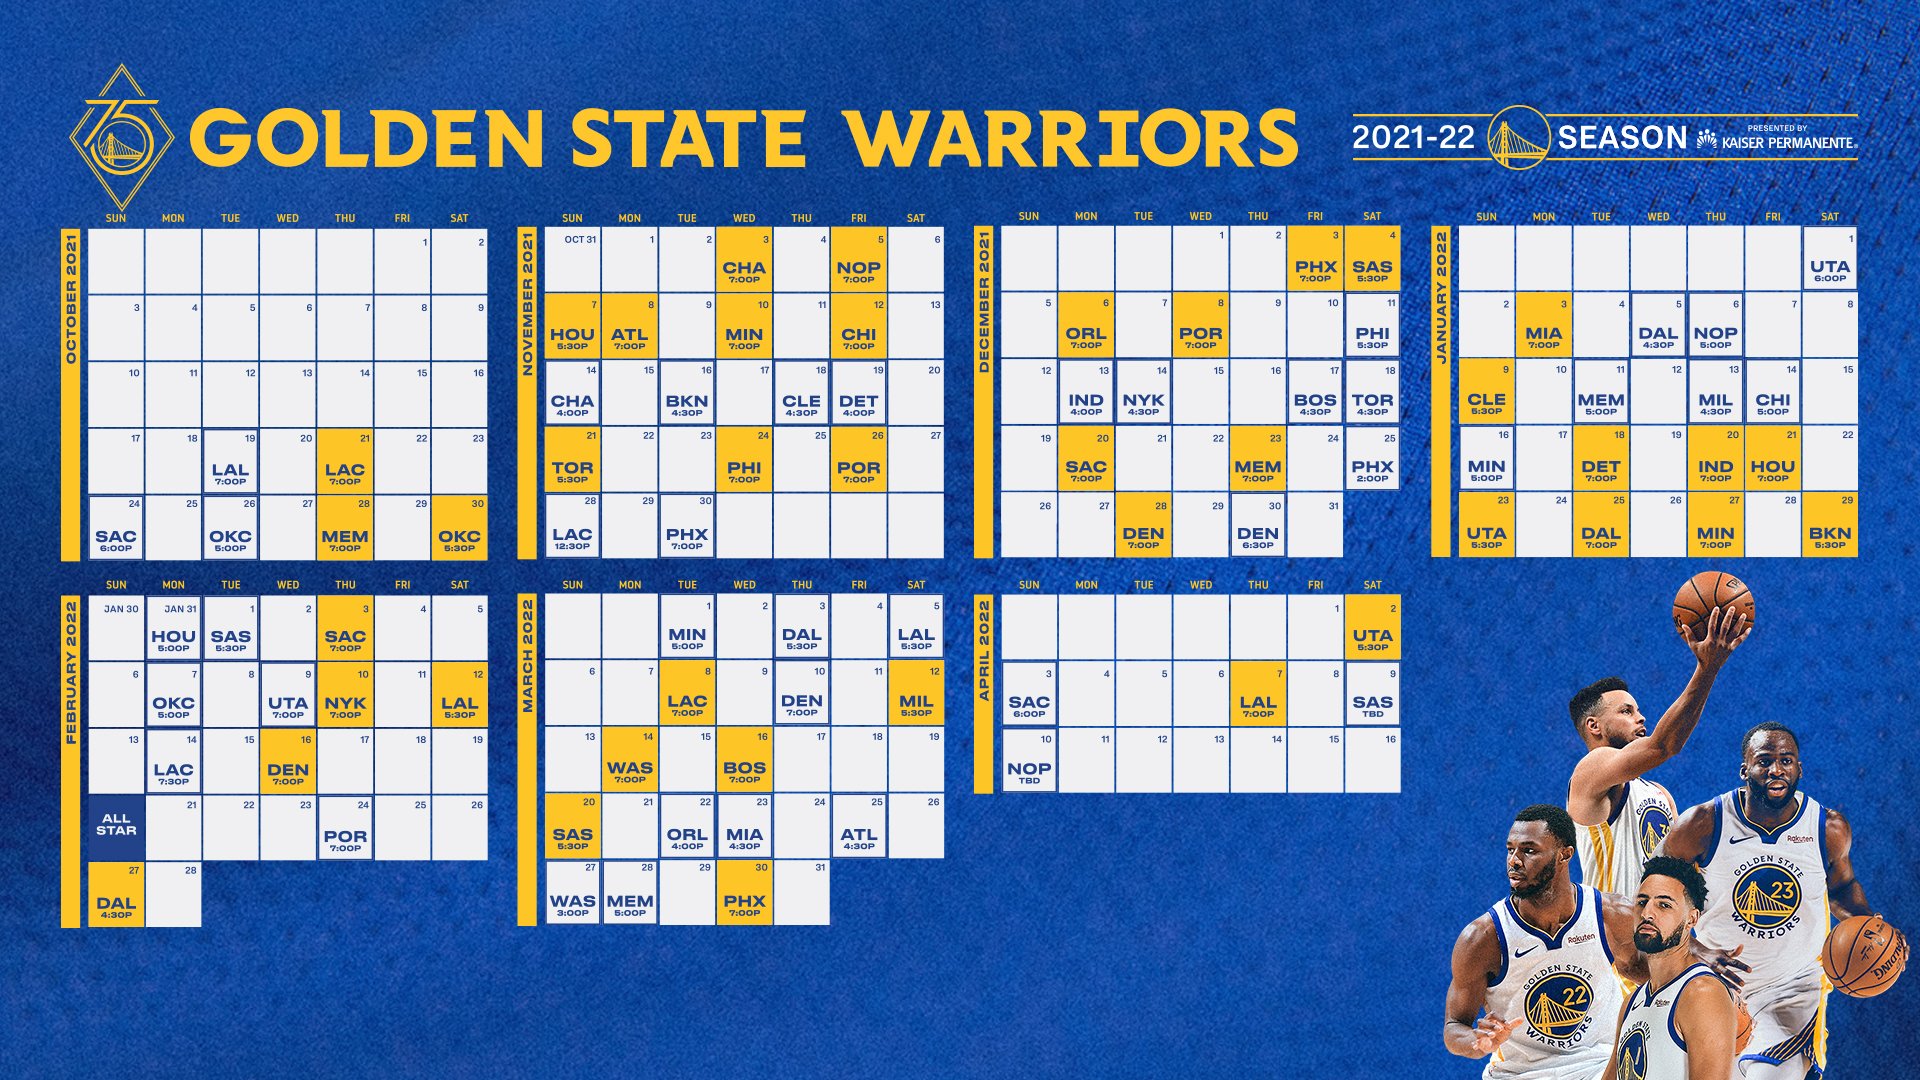 Golden State Warriors on Twitter: 10 years later. #WeBelieve